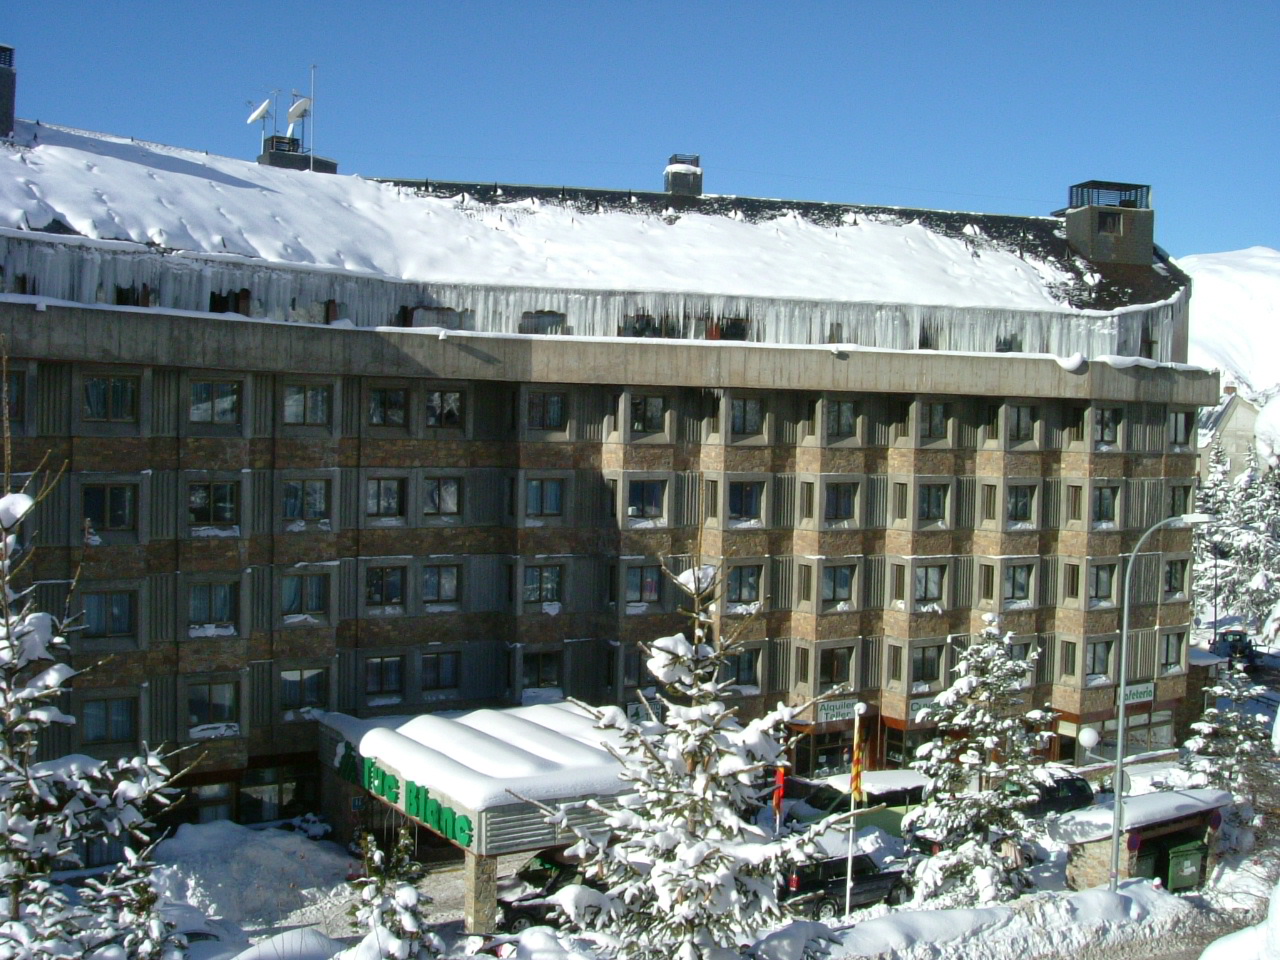 The Hotel Tuc Blanc in Baqueira